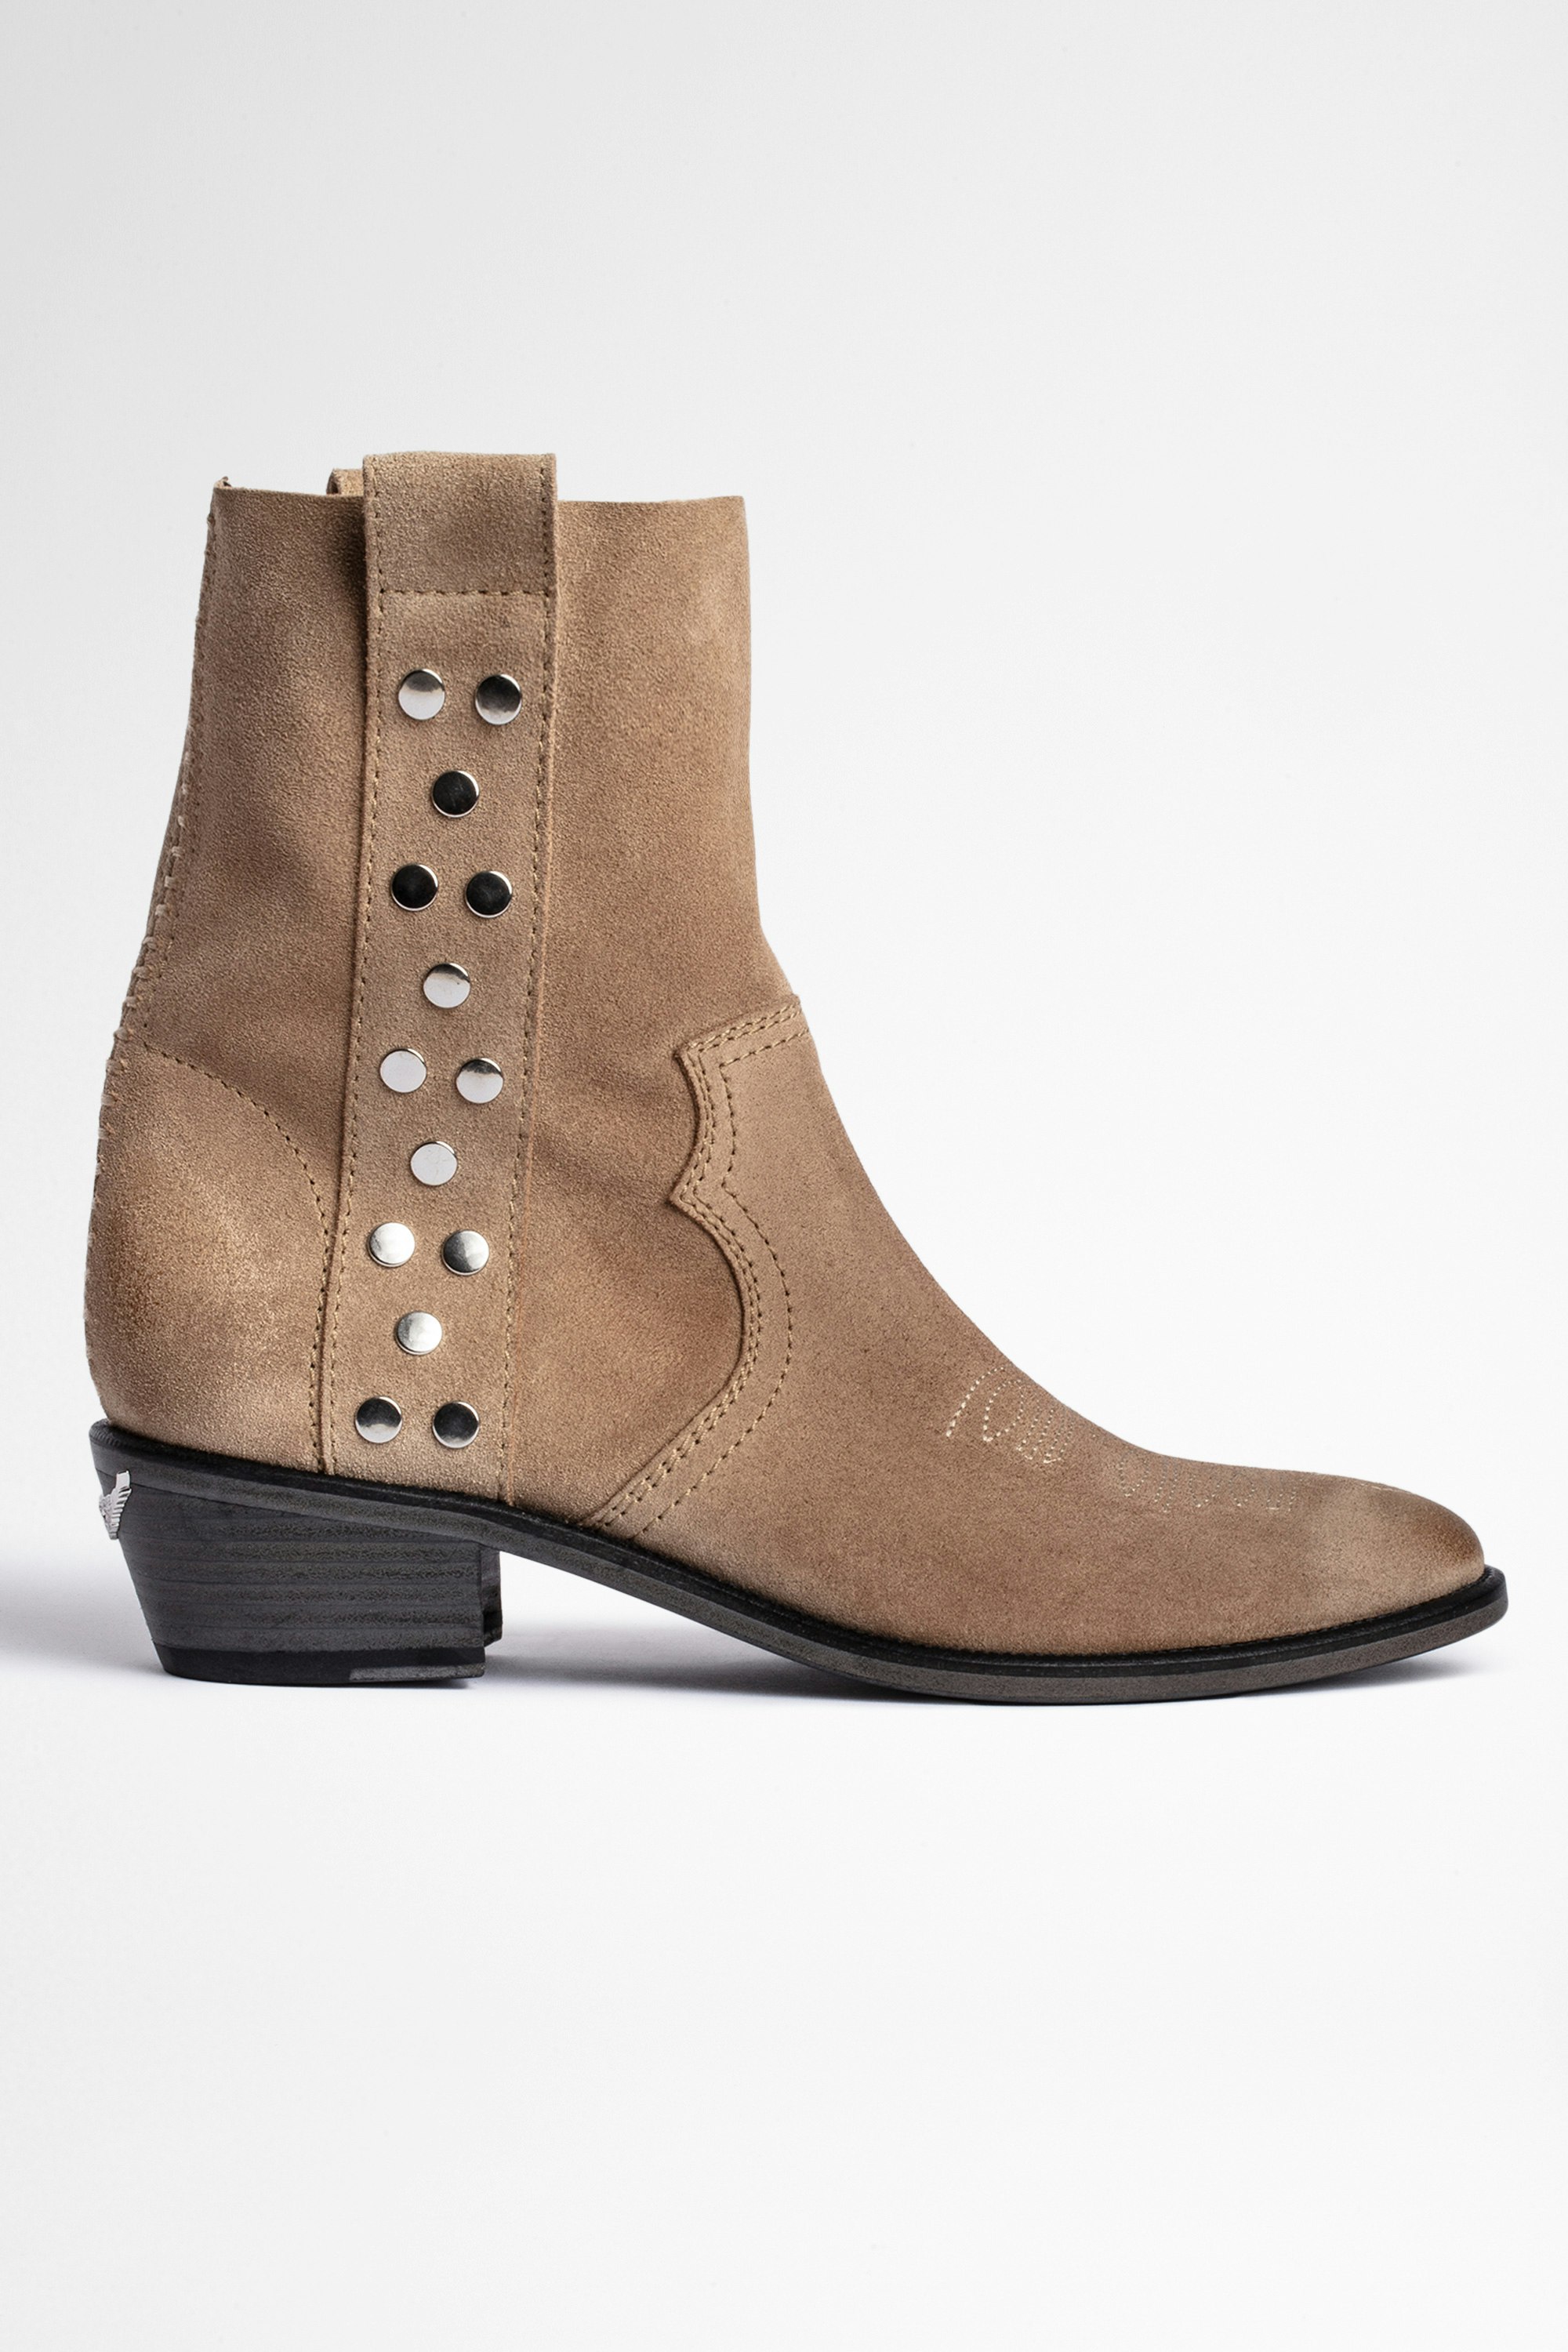 Pilar High Suede Ankle レザーブーツ Women's beige suede boots with silver studs